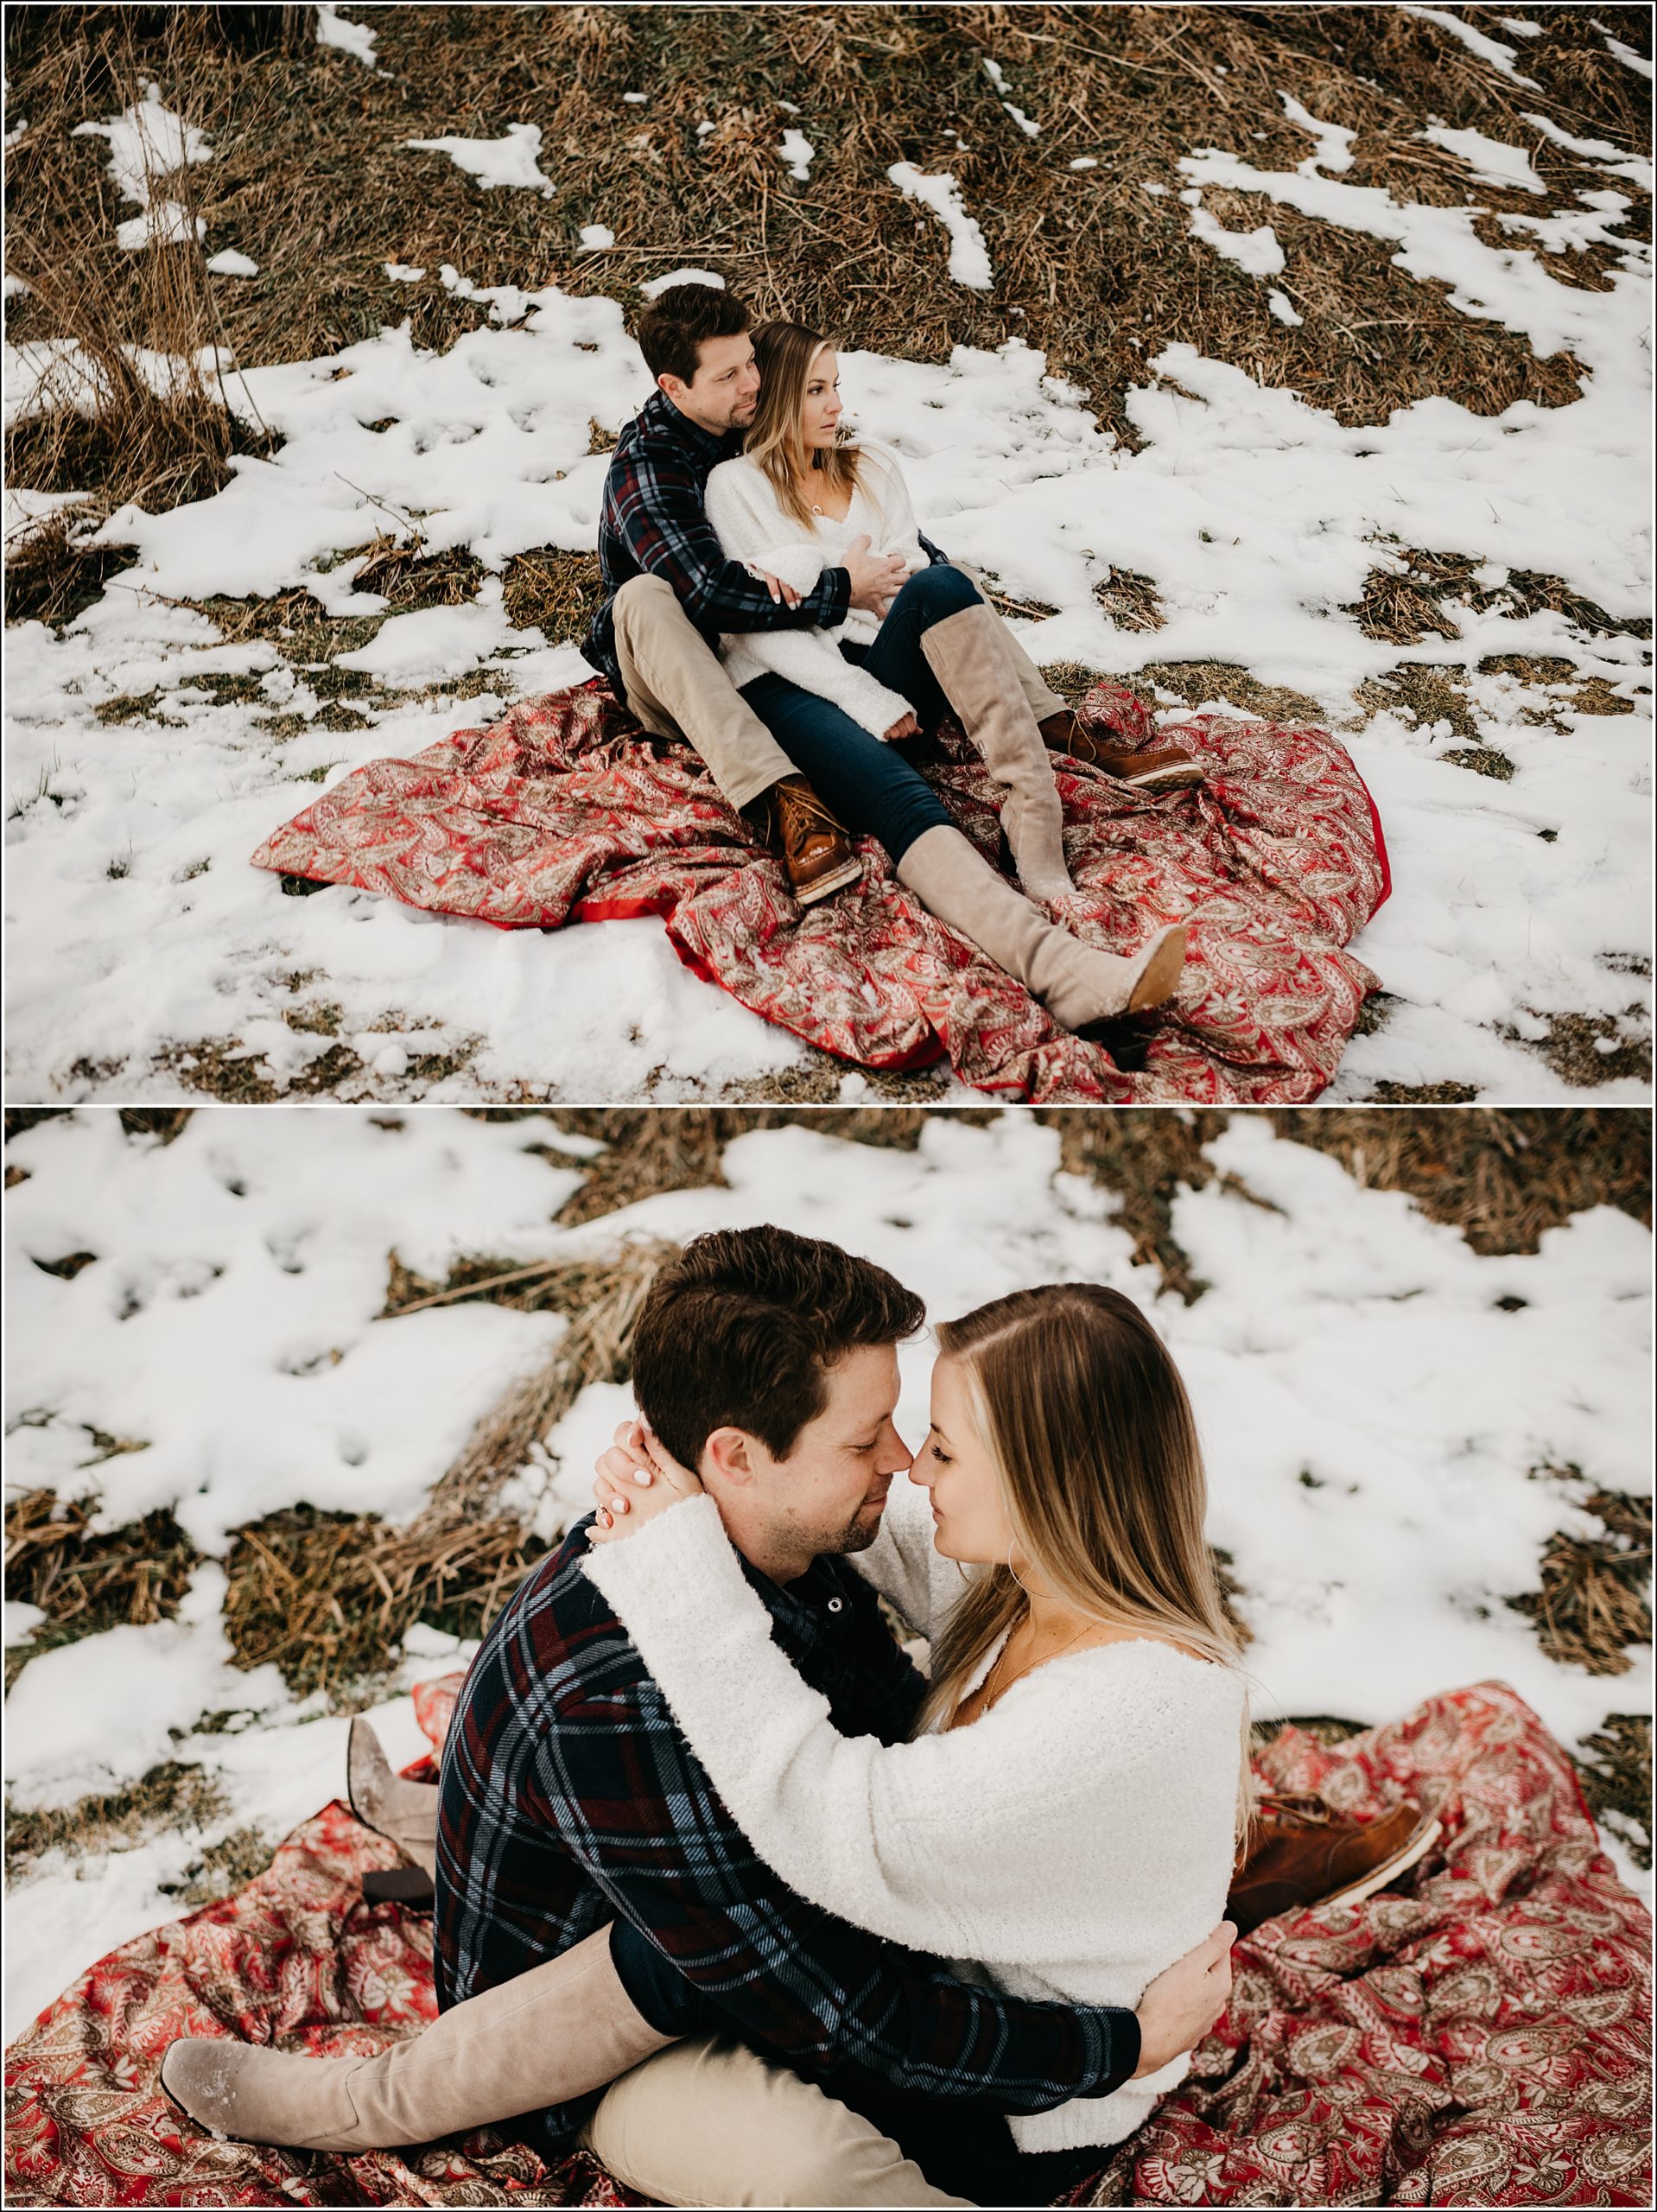 snowy engagement session on red patterned blanket